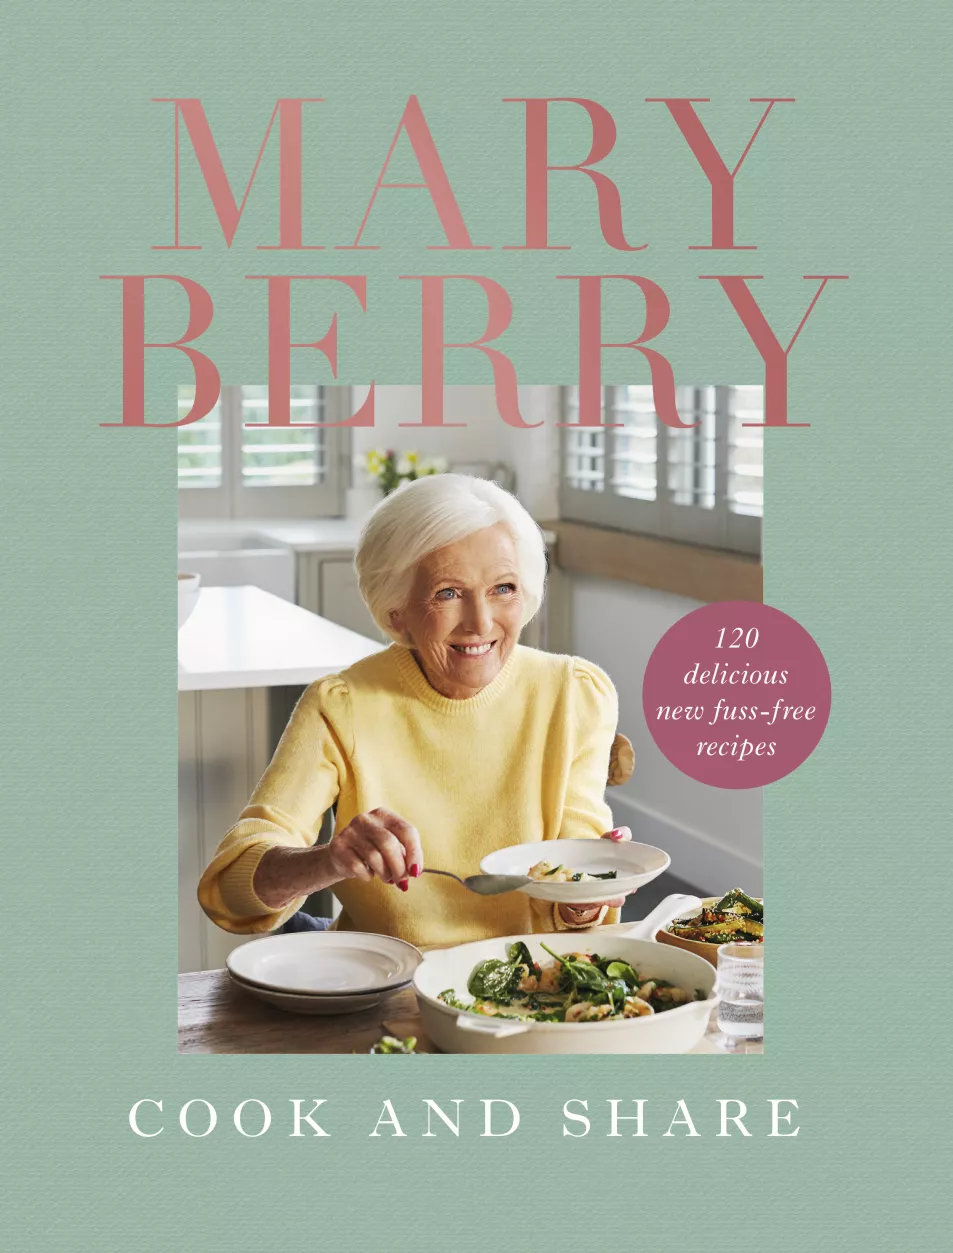 Cook And Share by Mary Berry